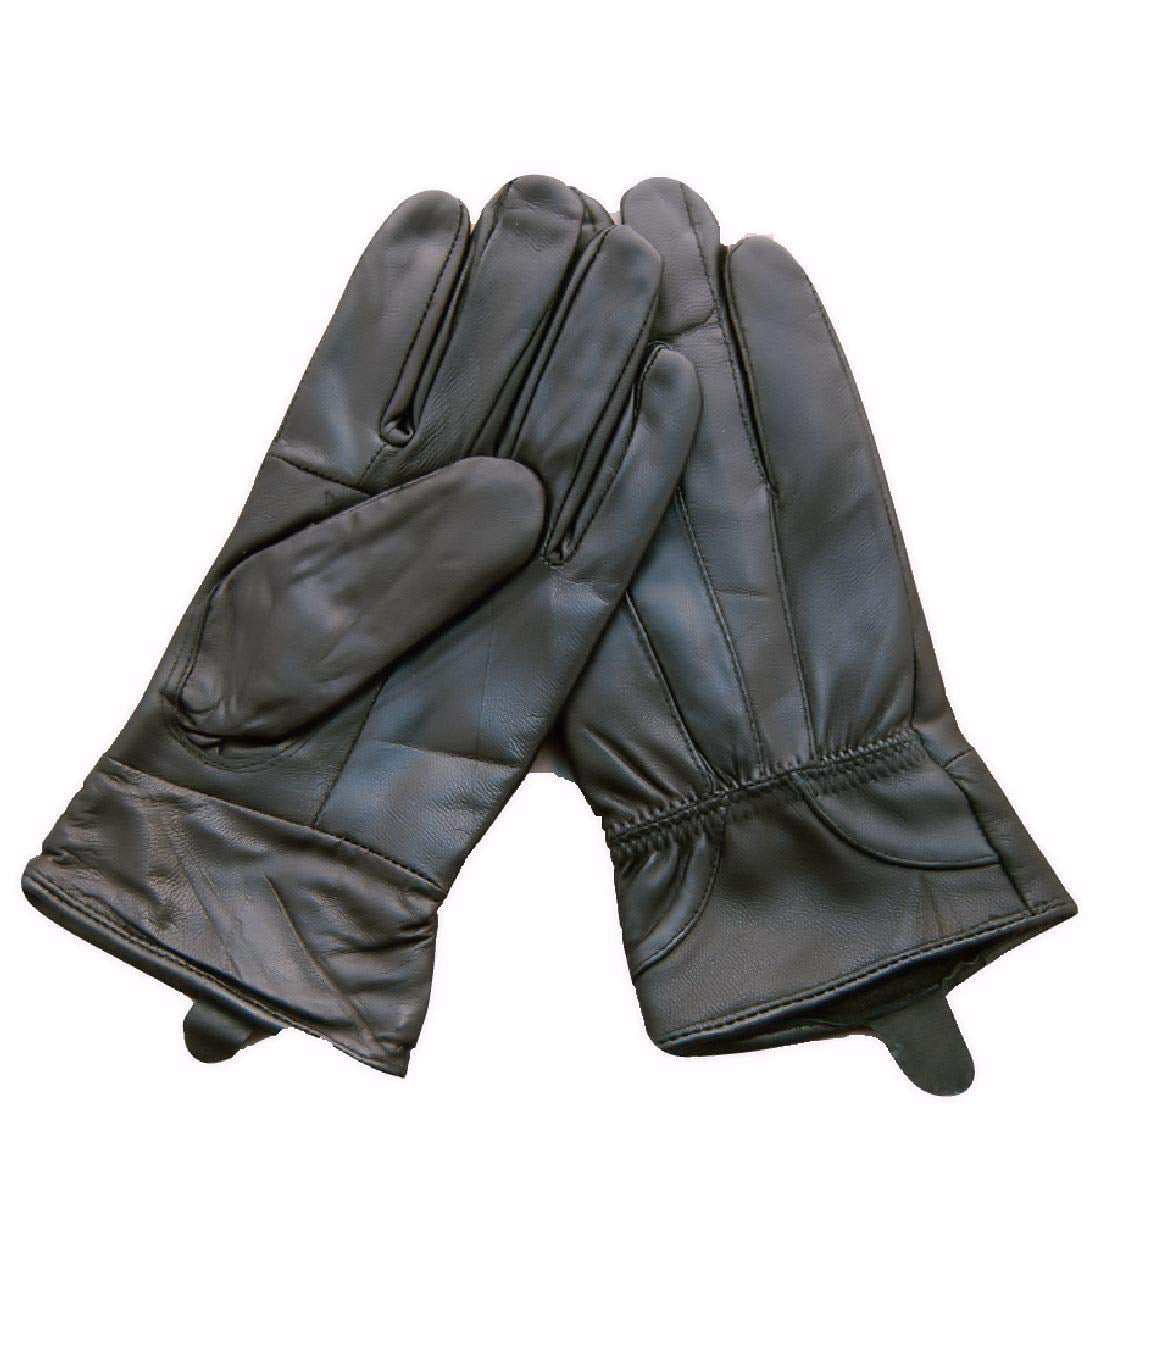 Weider Small Leather Gloves WBLGSY05 24 Ct New In Package 